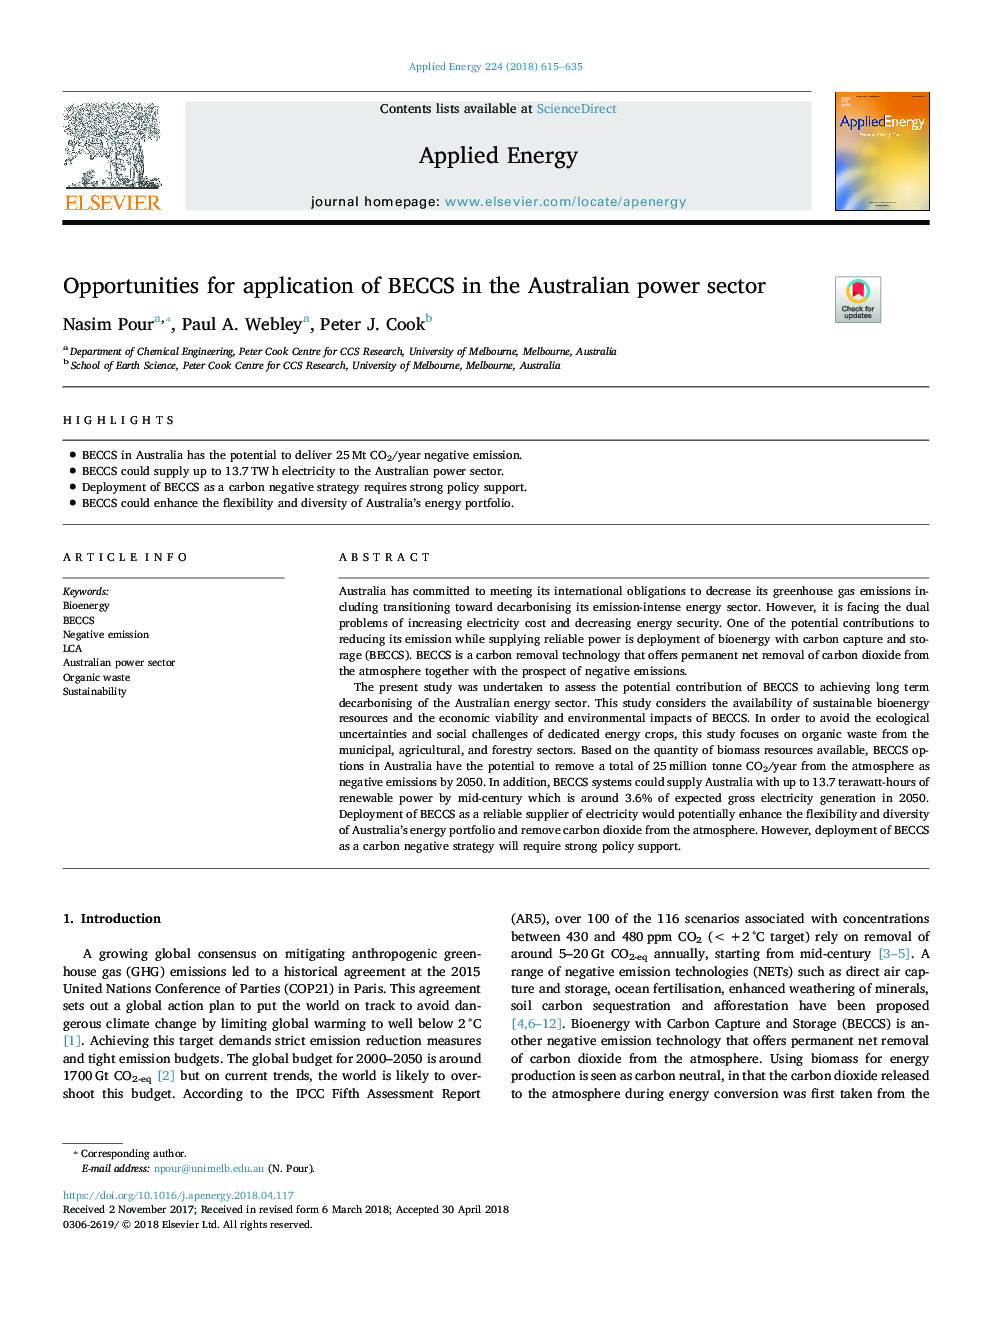 Opportunities for application of BECCS in the Australian power sector